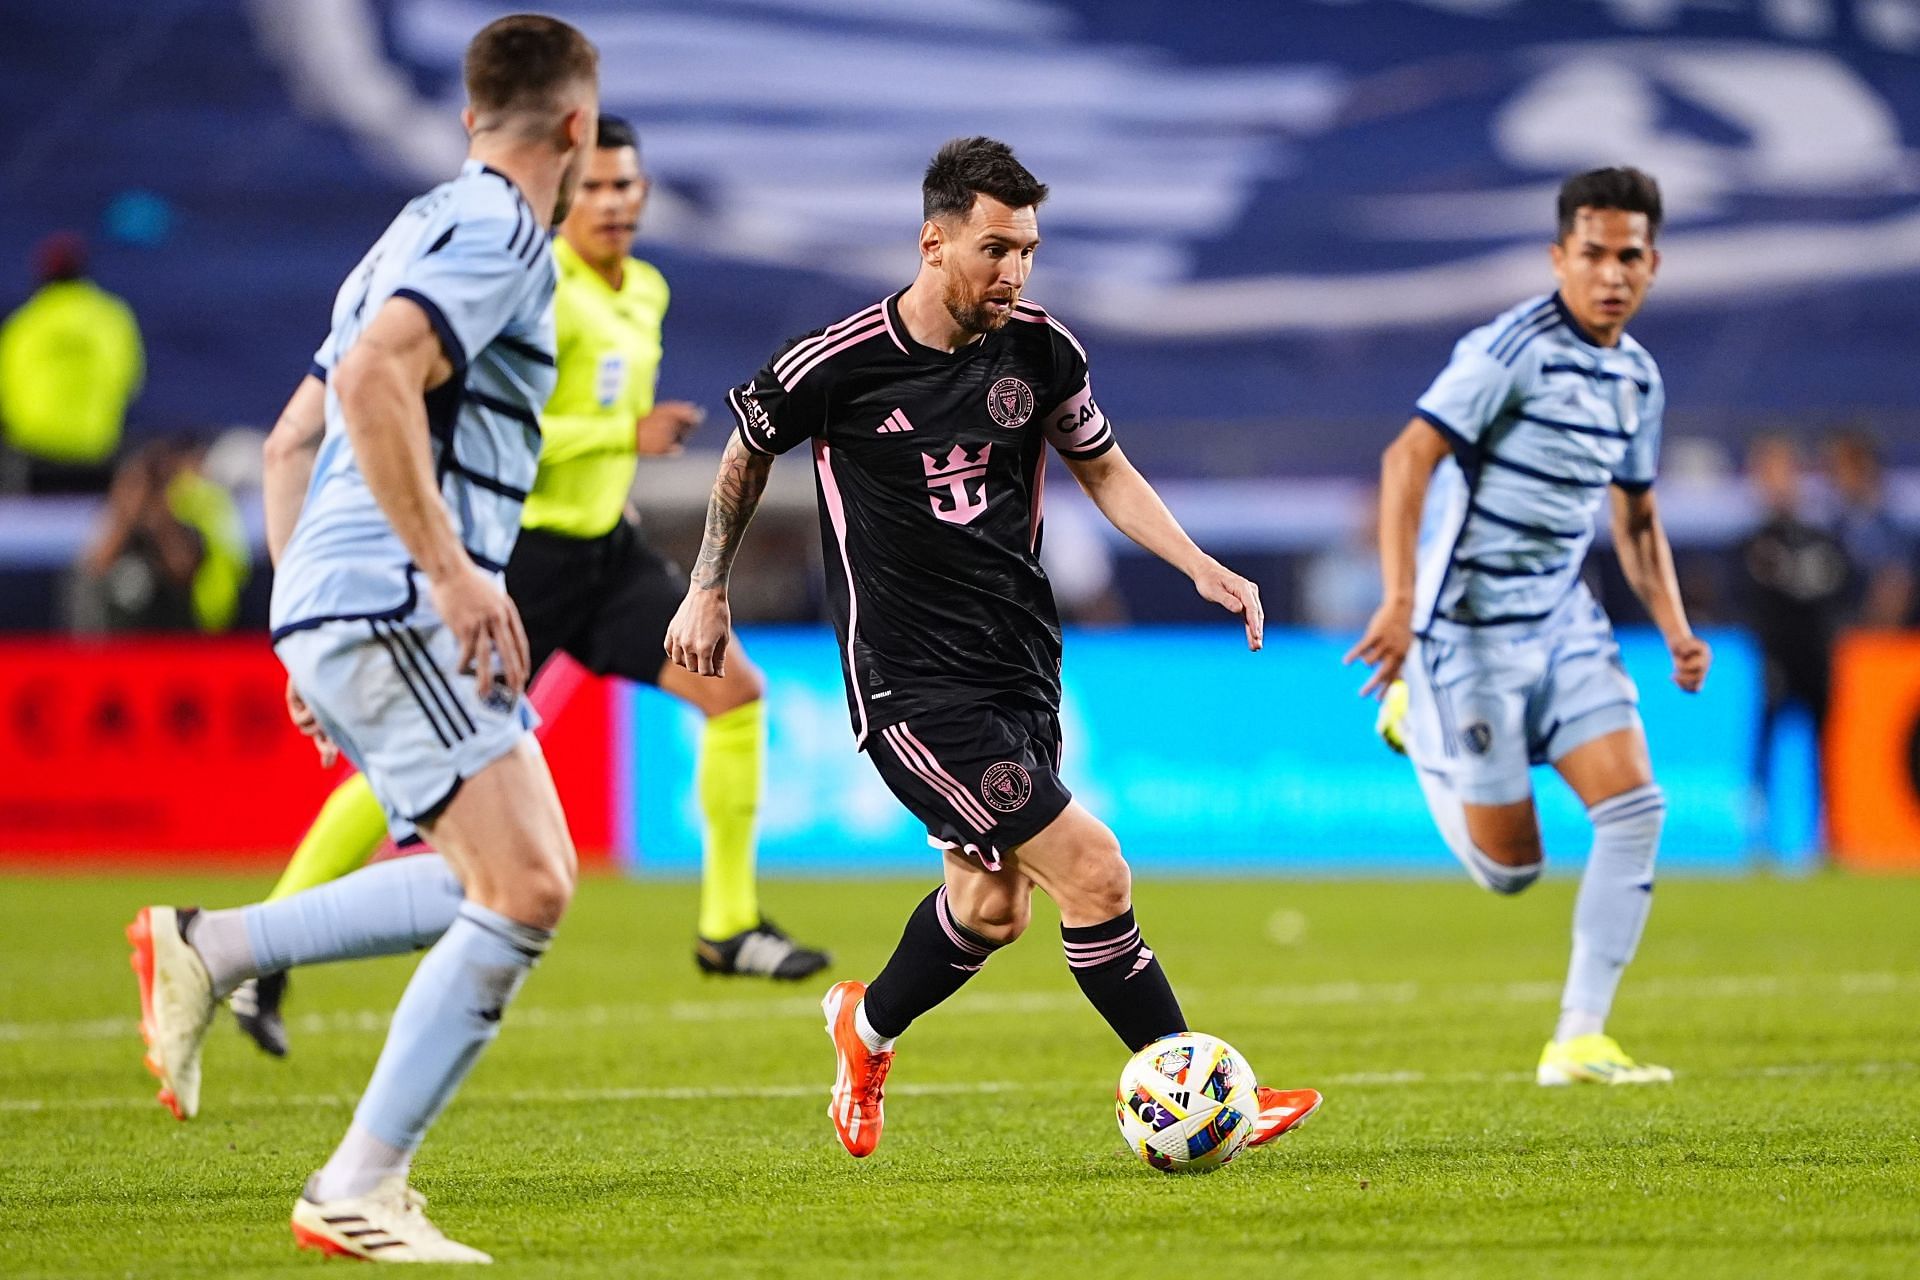 Lionel Messi scores and assists as 72k+ fans attend Sporting KC vs Inter Miami clash, new MLS record set